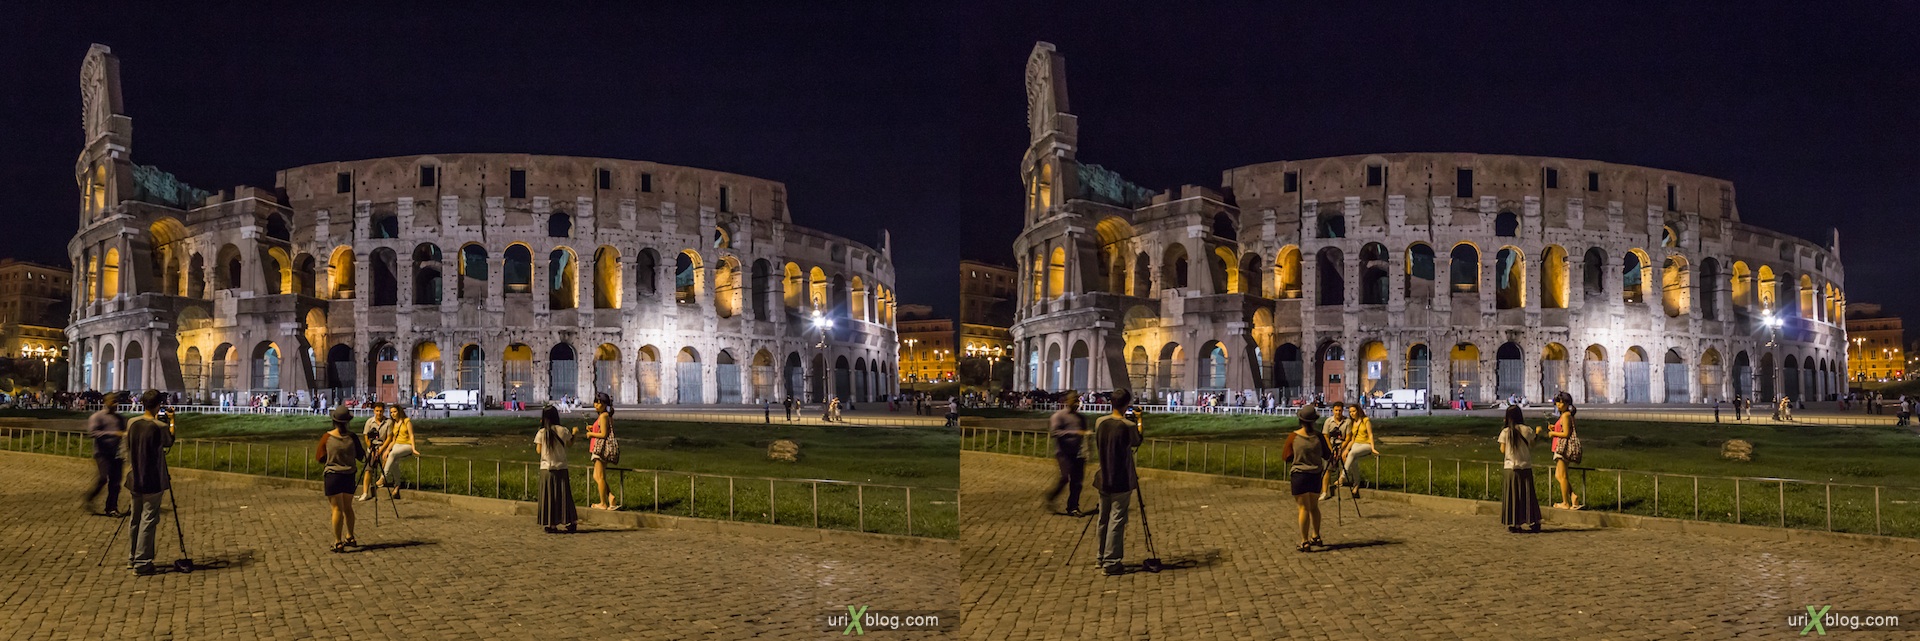 2012, Colosseum, Coliseum, Flavian Amphitheatre, Rome, Italy, night, 3D, stereo pair, cross-eyed, crossview, cross view stereo pair